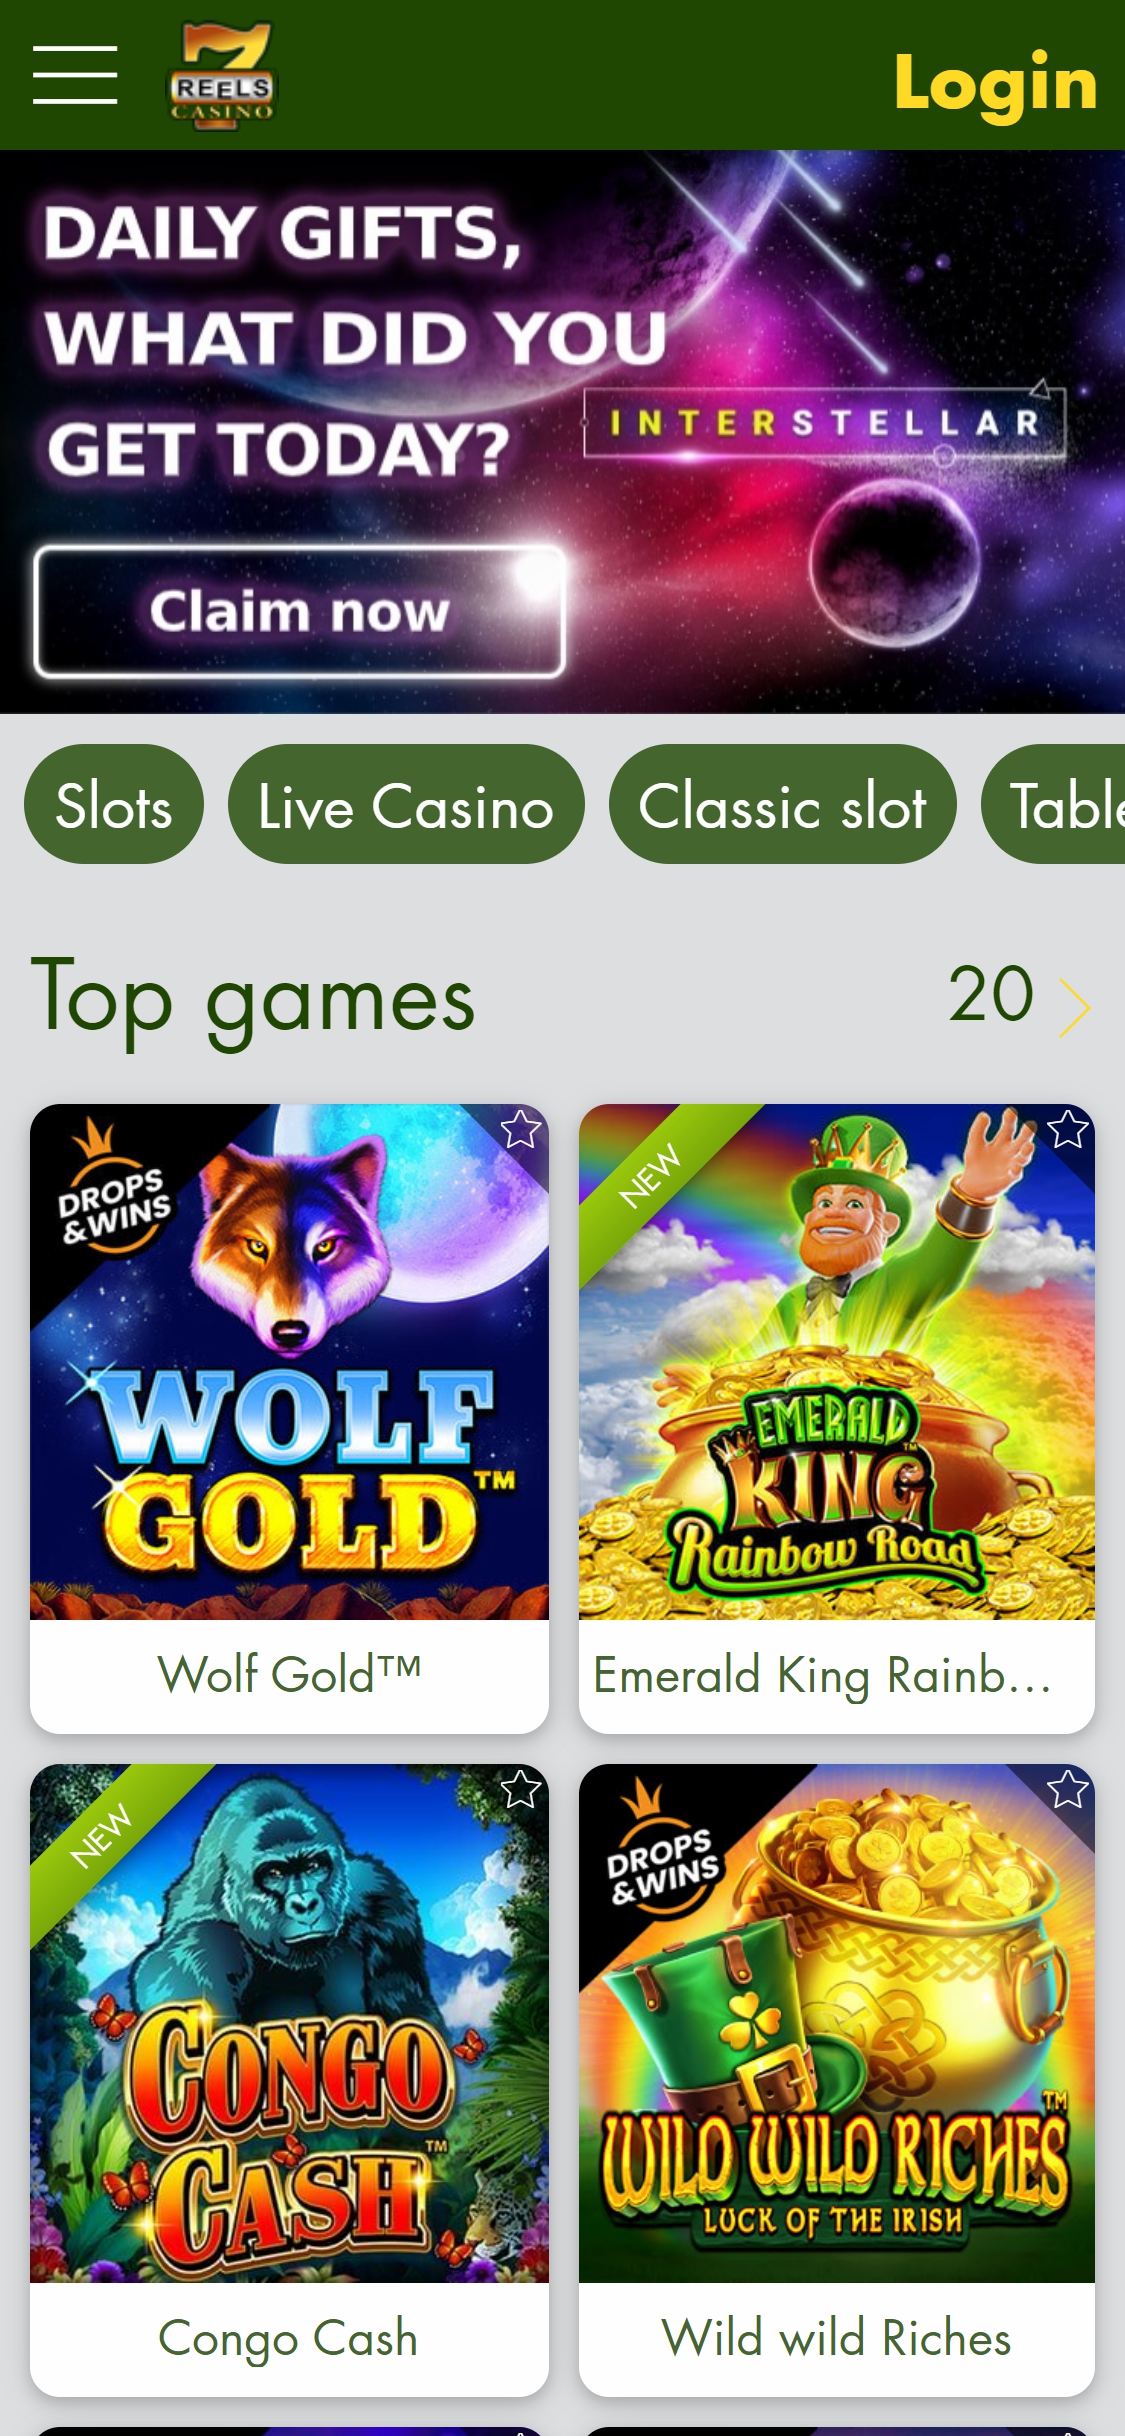 7Reels Casino Mobile Review